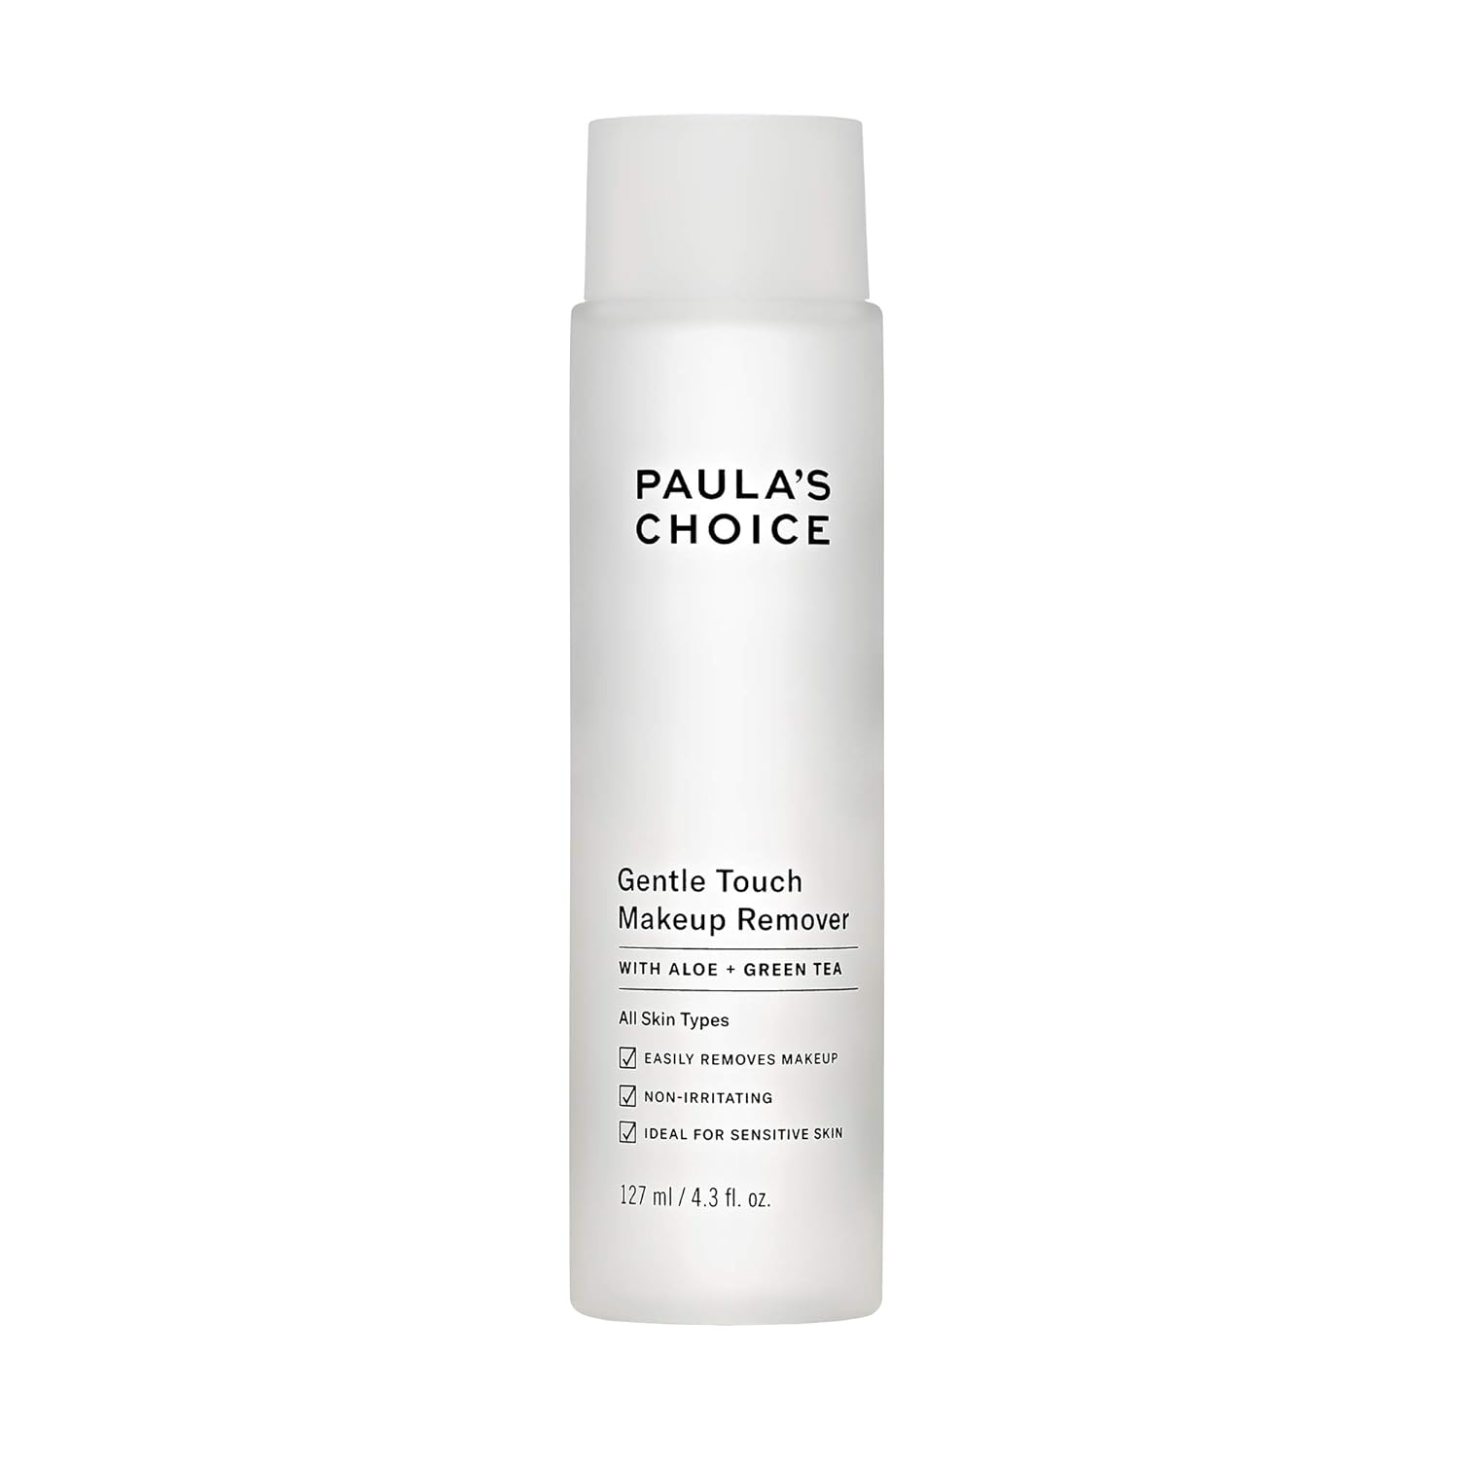 paula's choice gentle touch, one of the best oil-free makeup removers